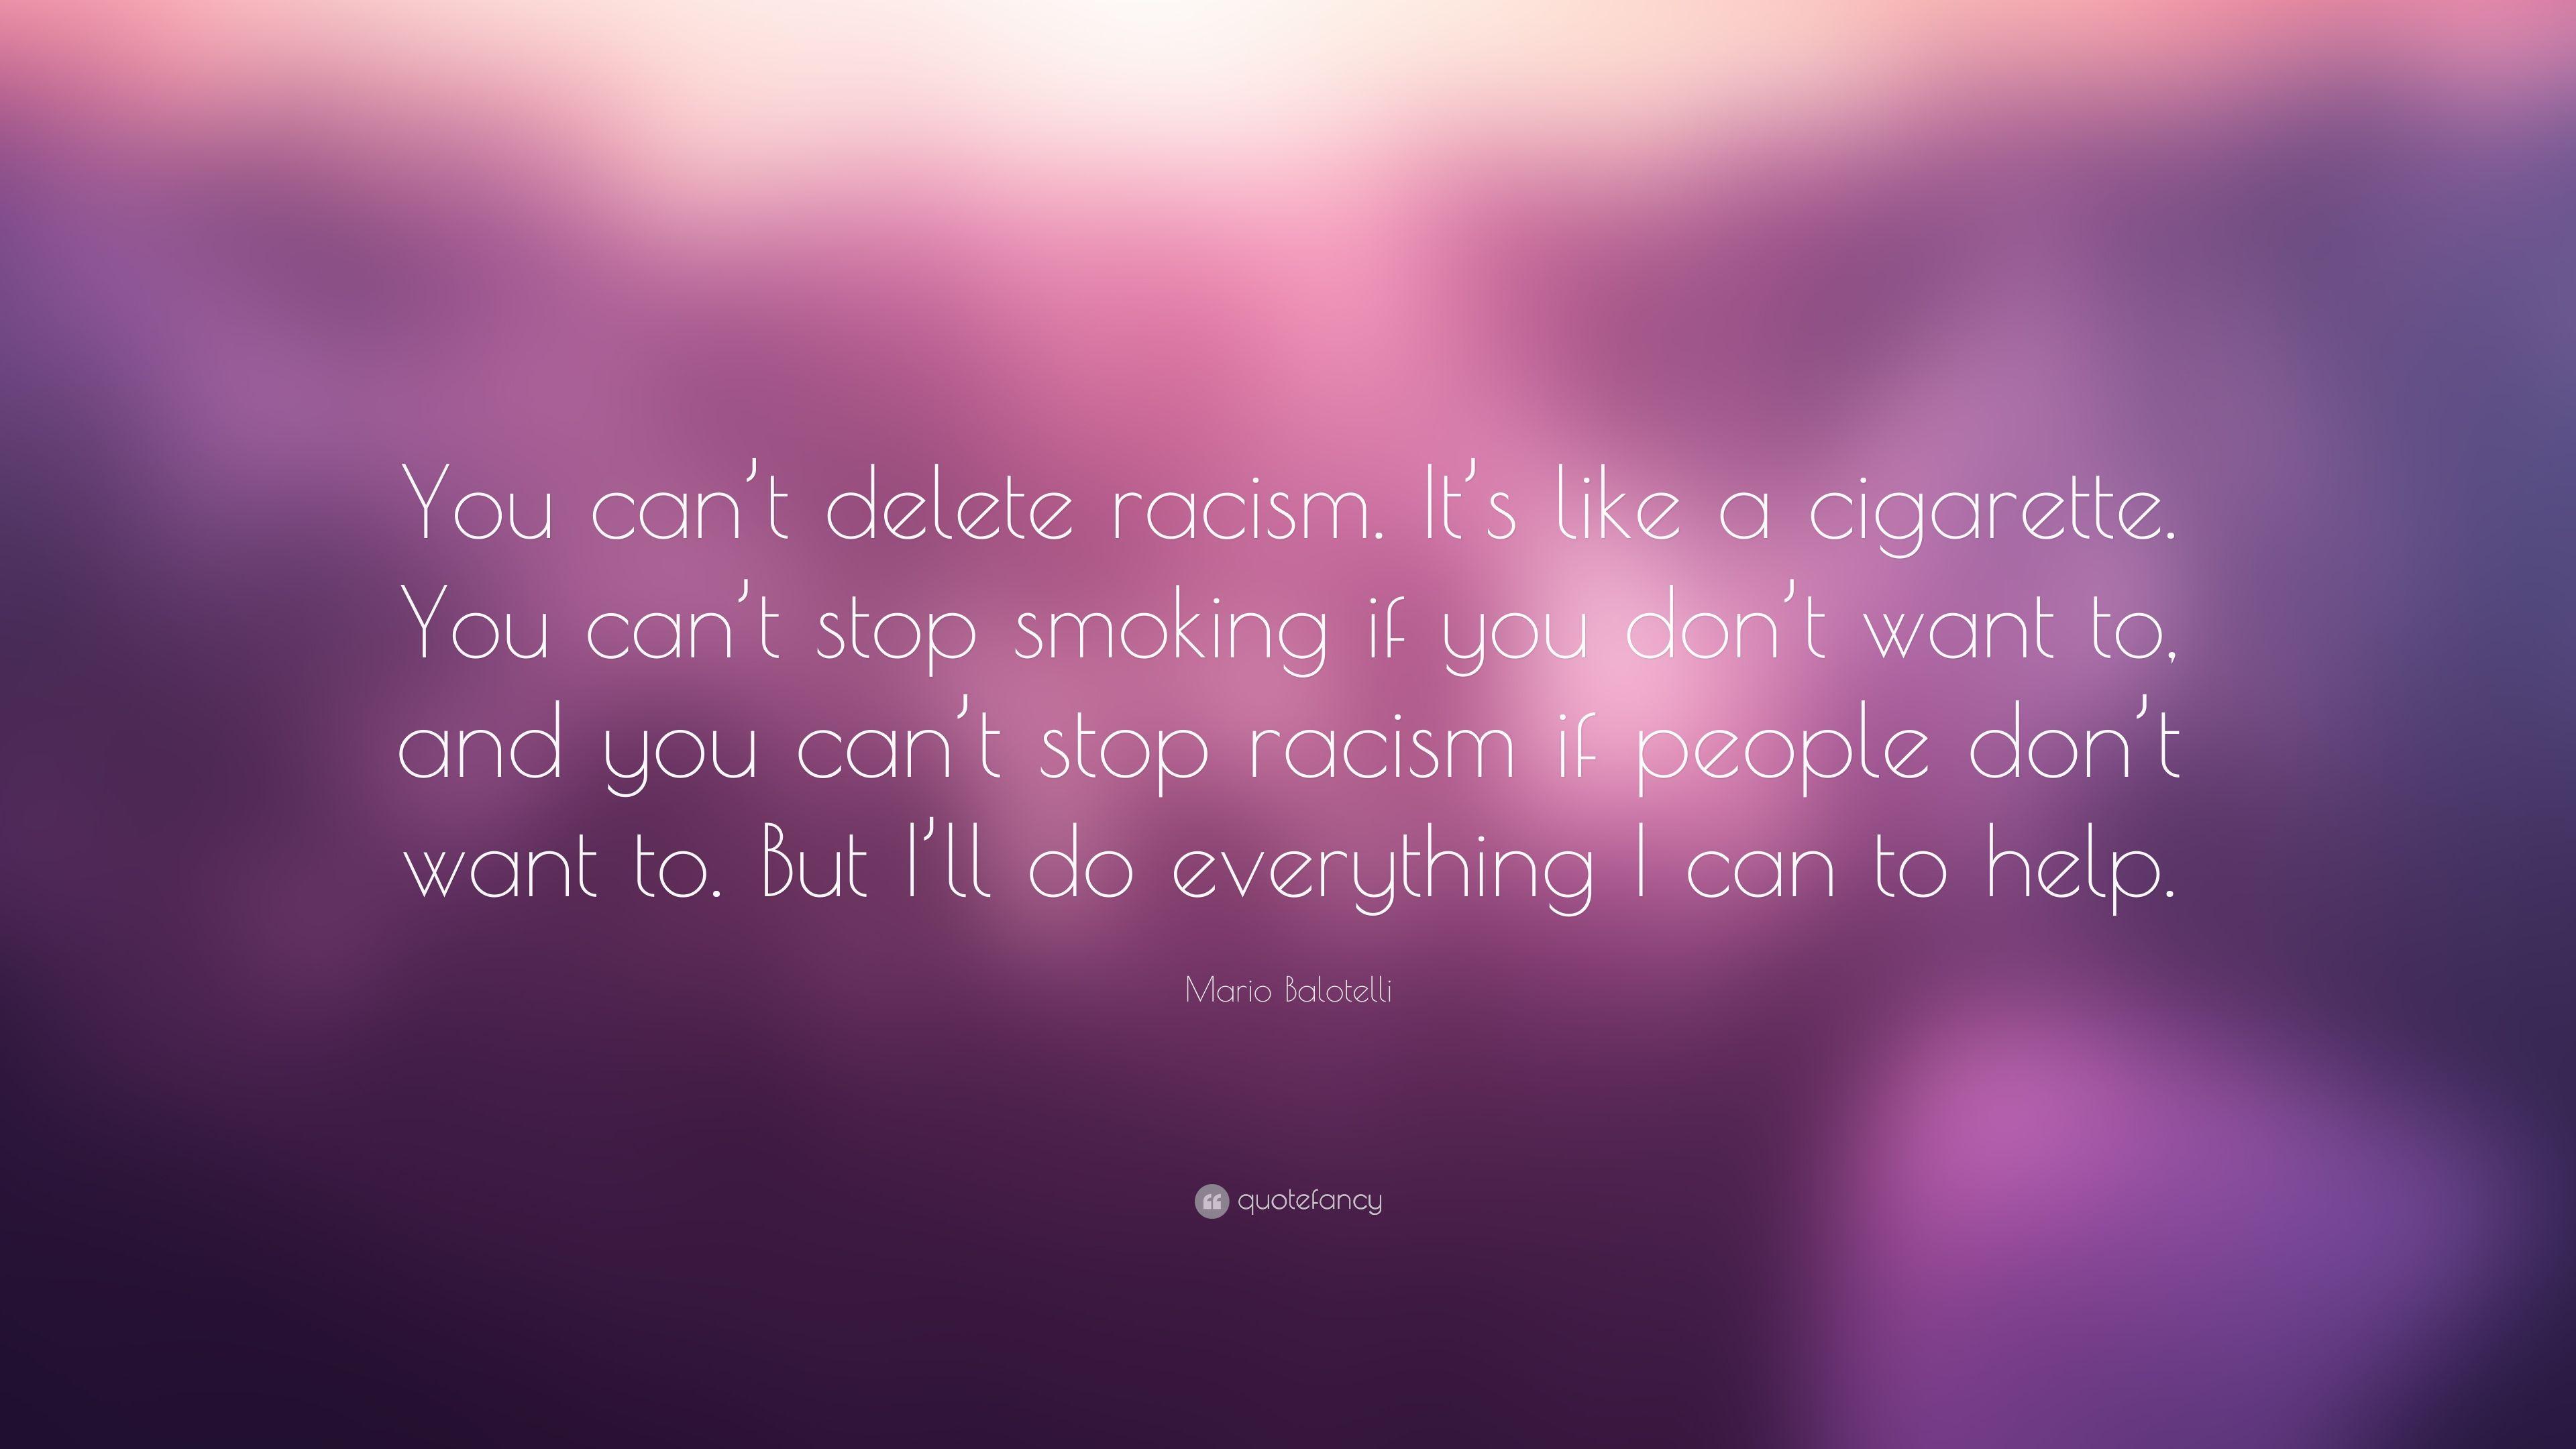 Mario Balotelli Quote: “You can't delete racism. It's like a